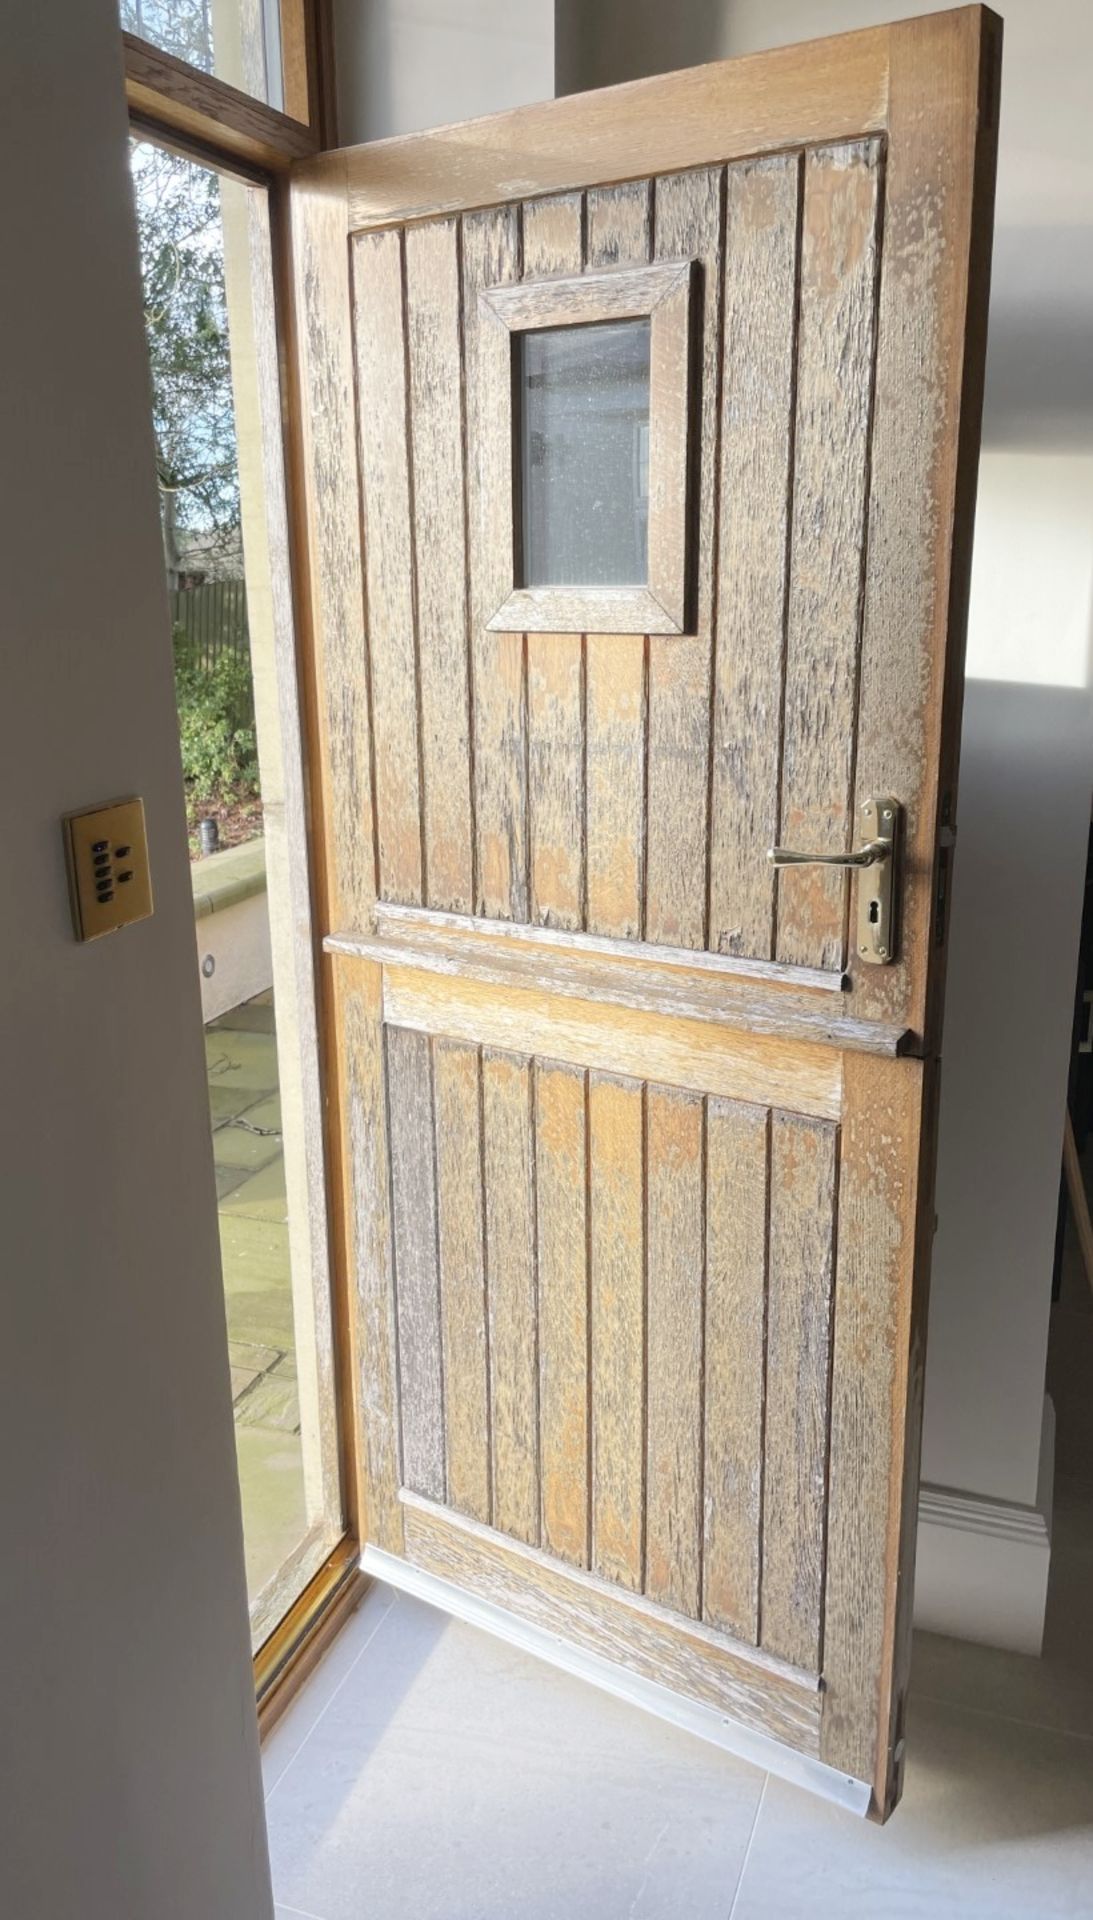 1 x Solid Wood Lockable Stable-style External Door with Frame and Double Glazed Window Panel - Image 2 of 30